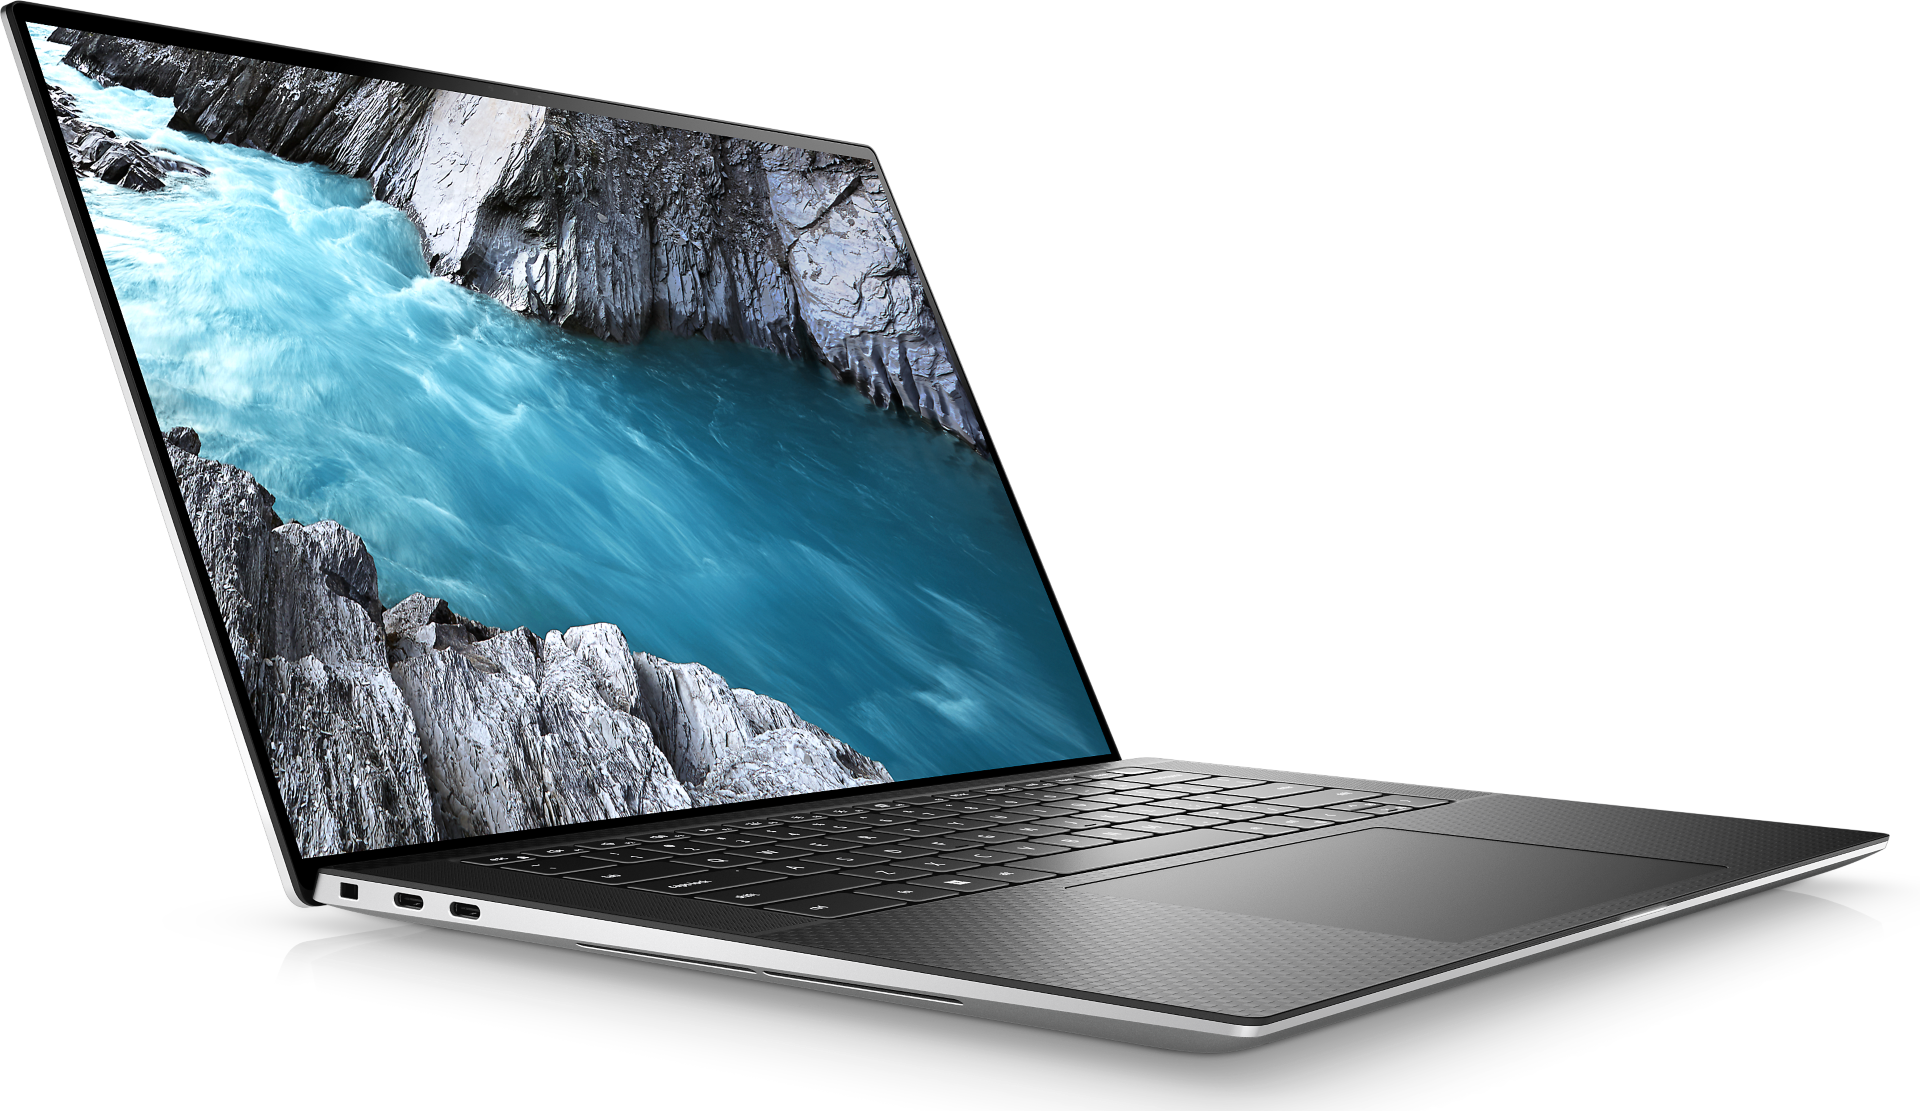 The Dell XPS 15 9530 is here XPS 15 9500 chassis now with up to Core